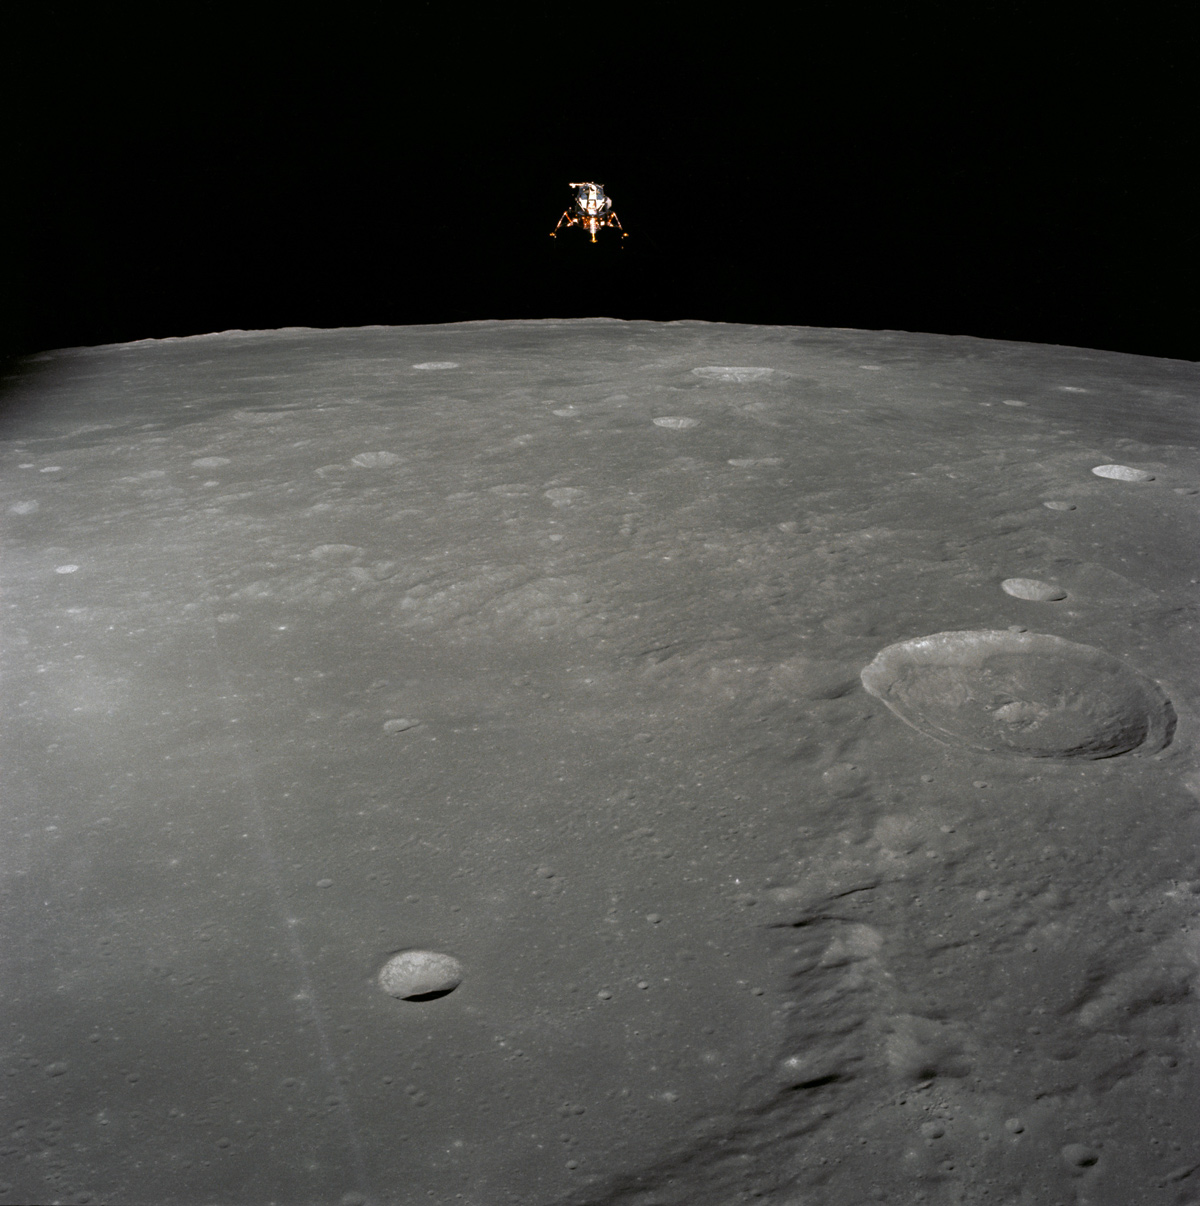 The Apollo 12 Lunar Module in lunar orbit, visible in space over the Moon's horizon. On the lunar surface below, a row of craters and hills extending towards the viewer.